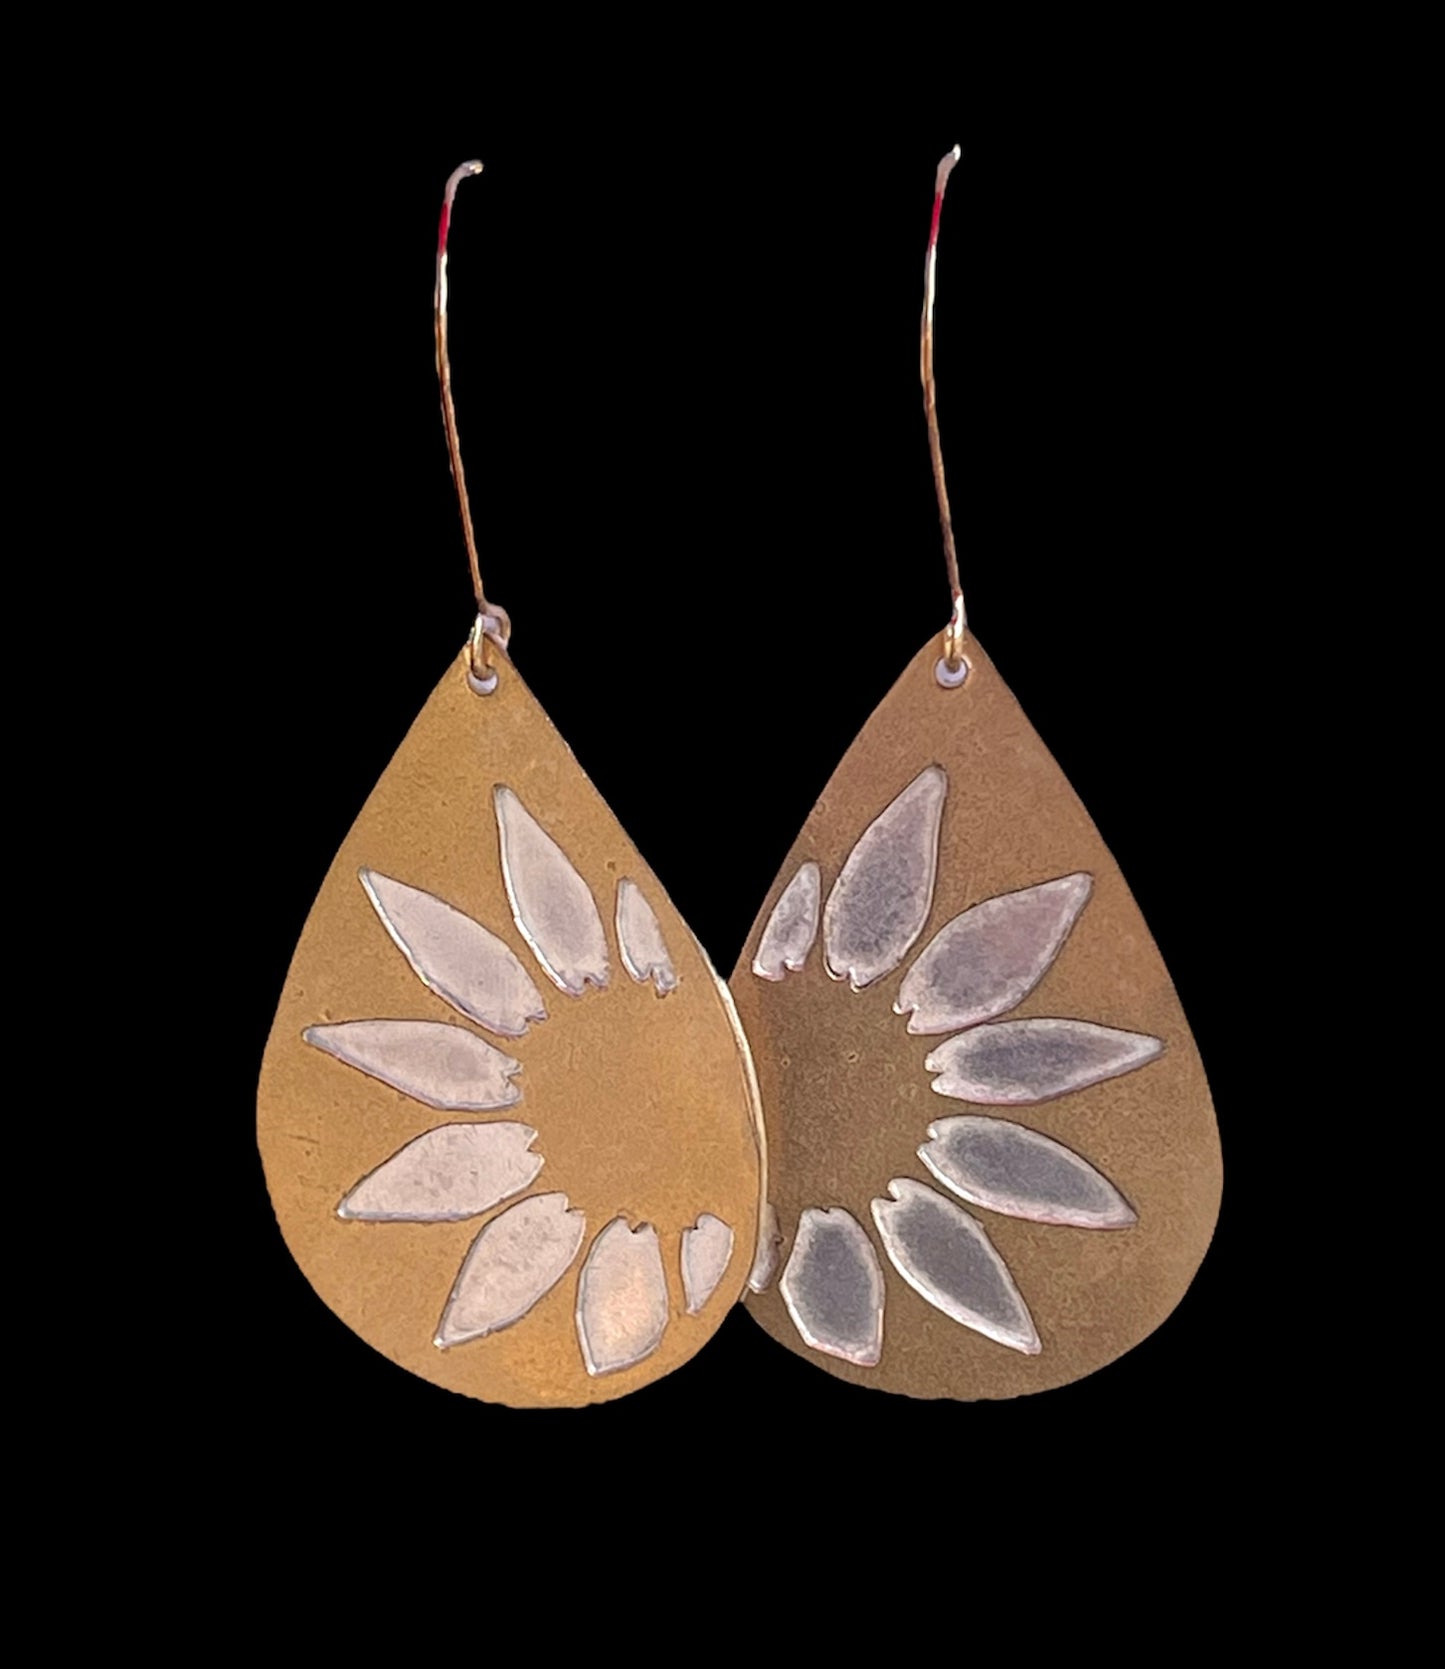 Sunflower earrings jewelry bronze and sterling silver